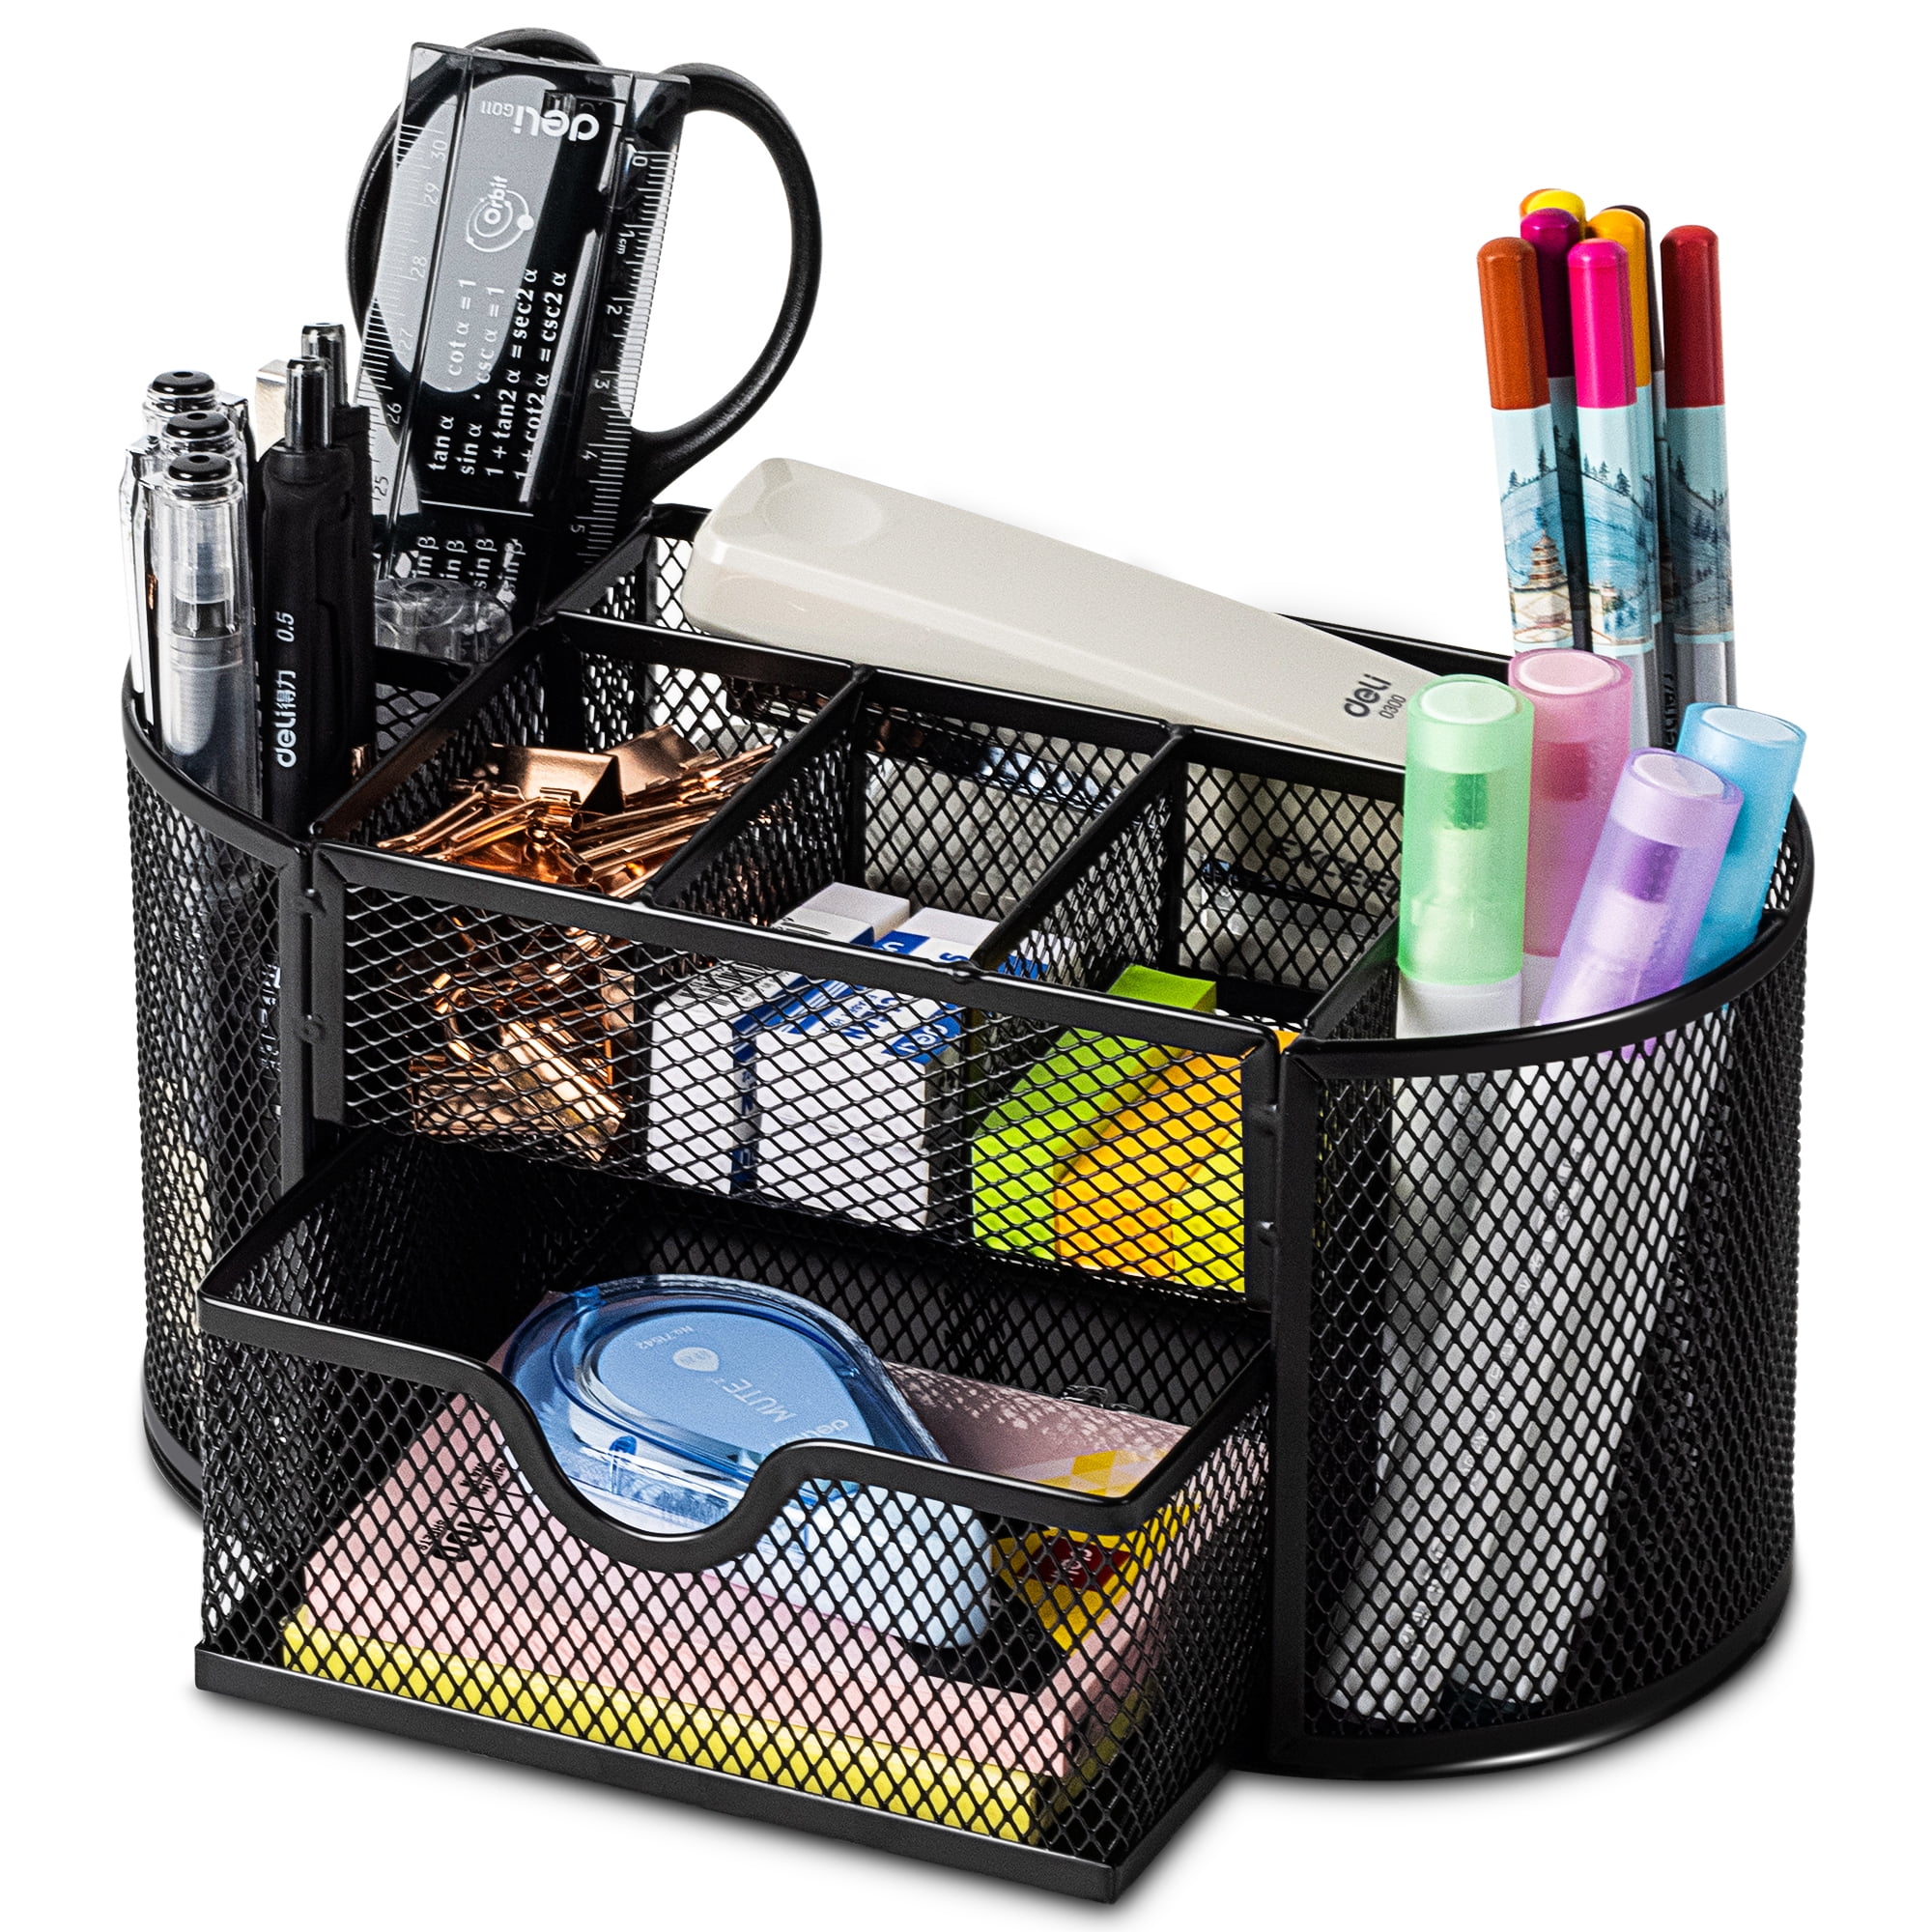 Mesh desk organizer keeps all your office supplies in one place desktop organi 